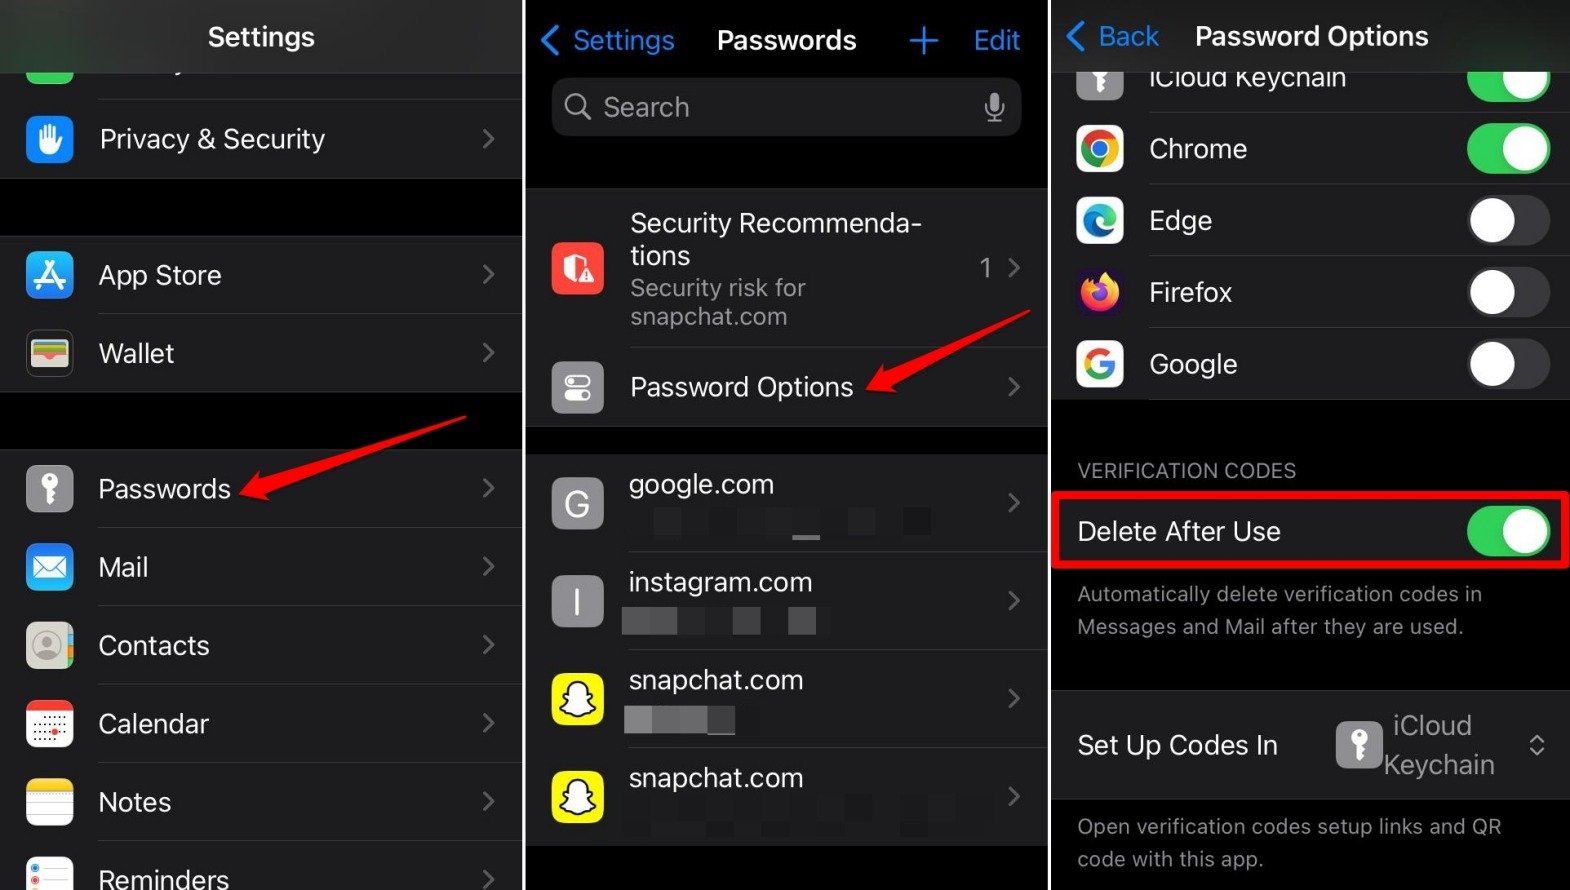 enable-delete-after-use-to-remove-OTPs-and-verification-codes-on-iPhone